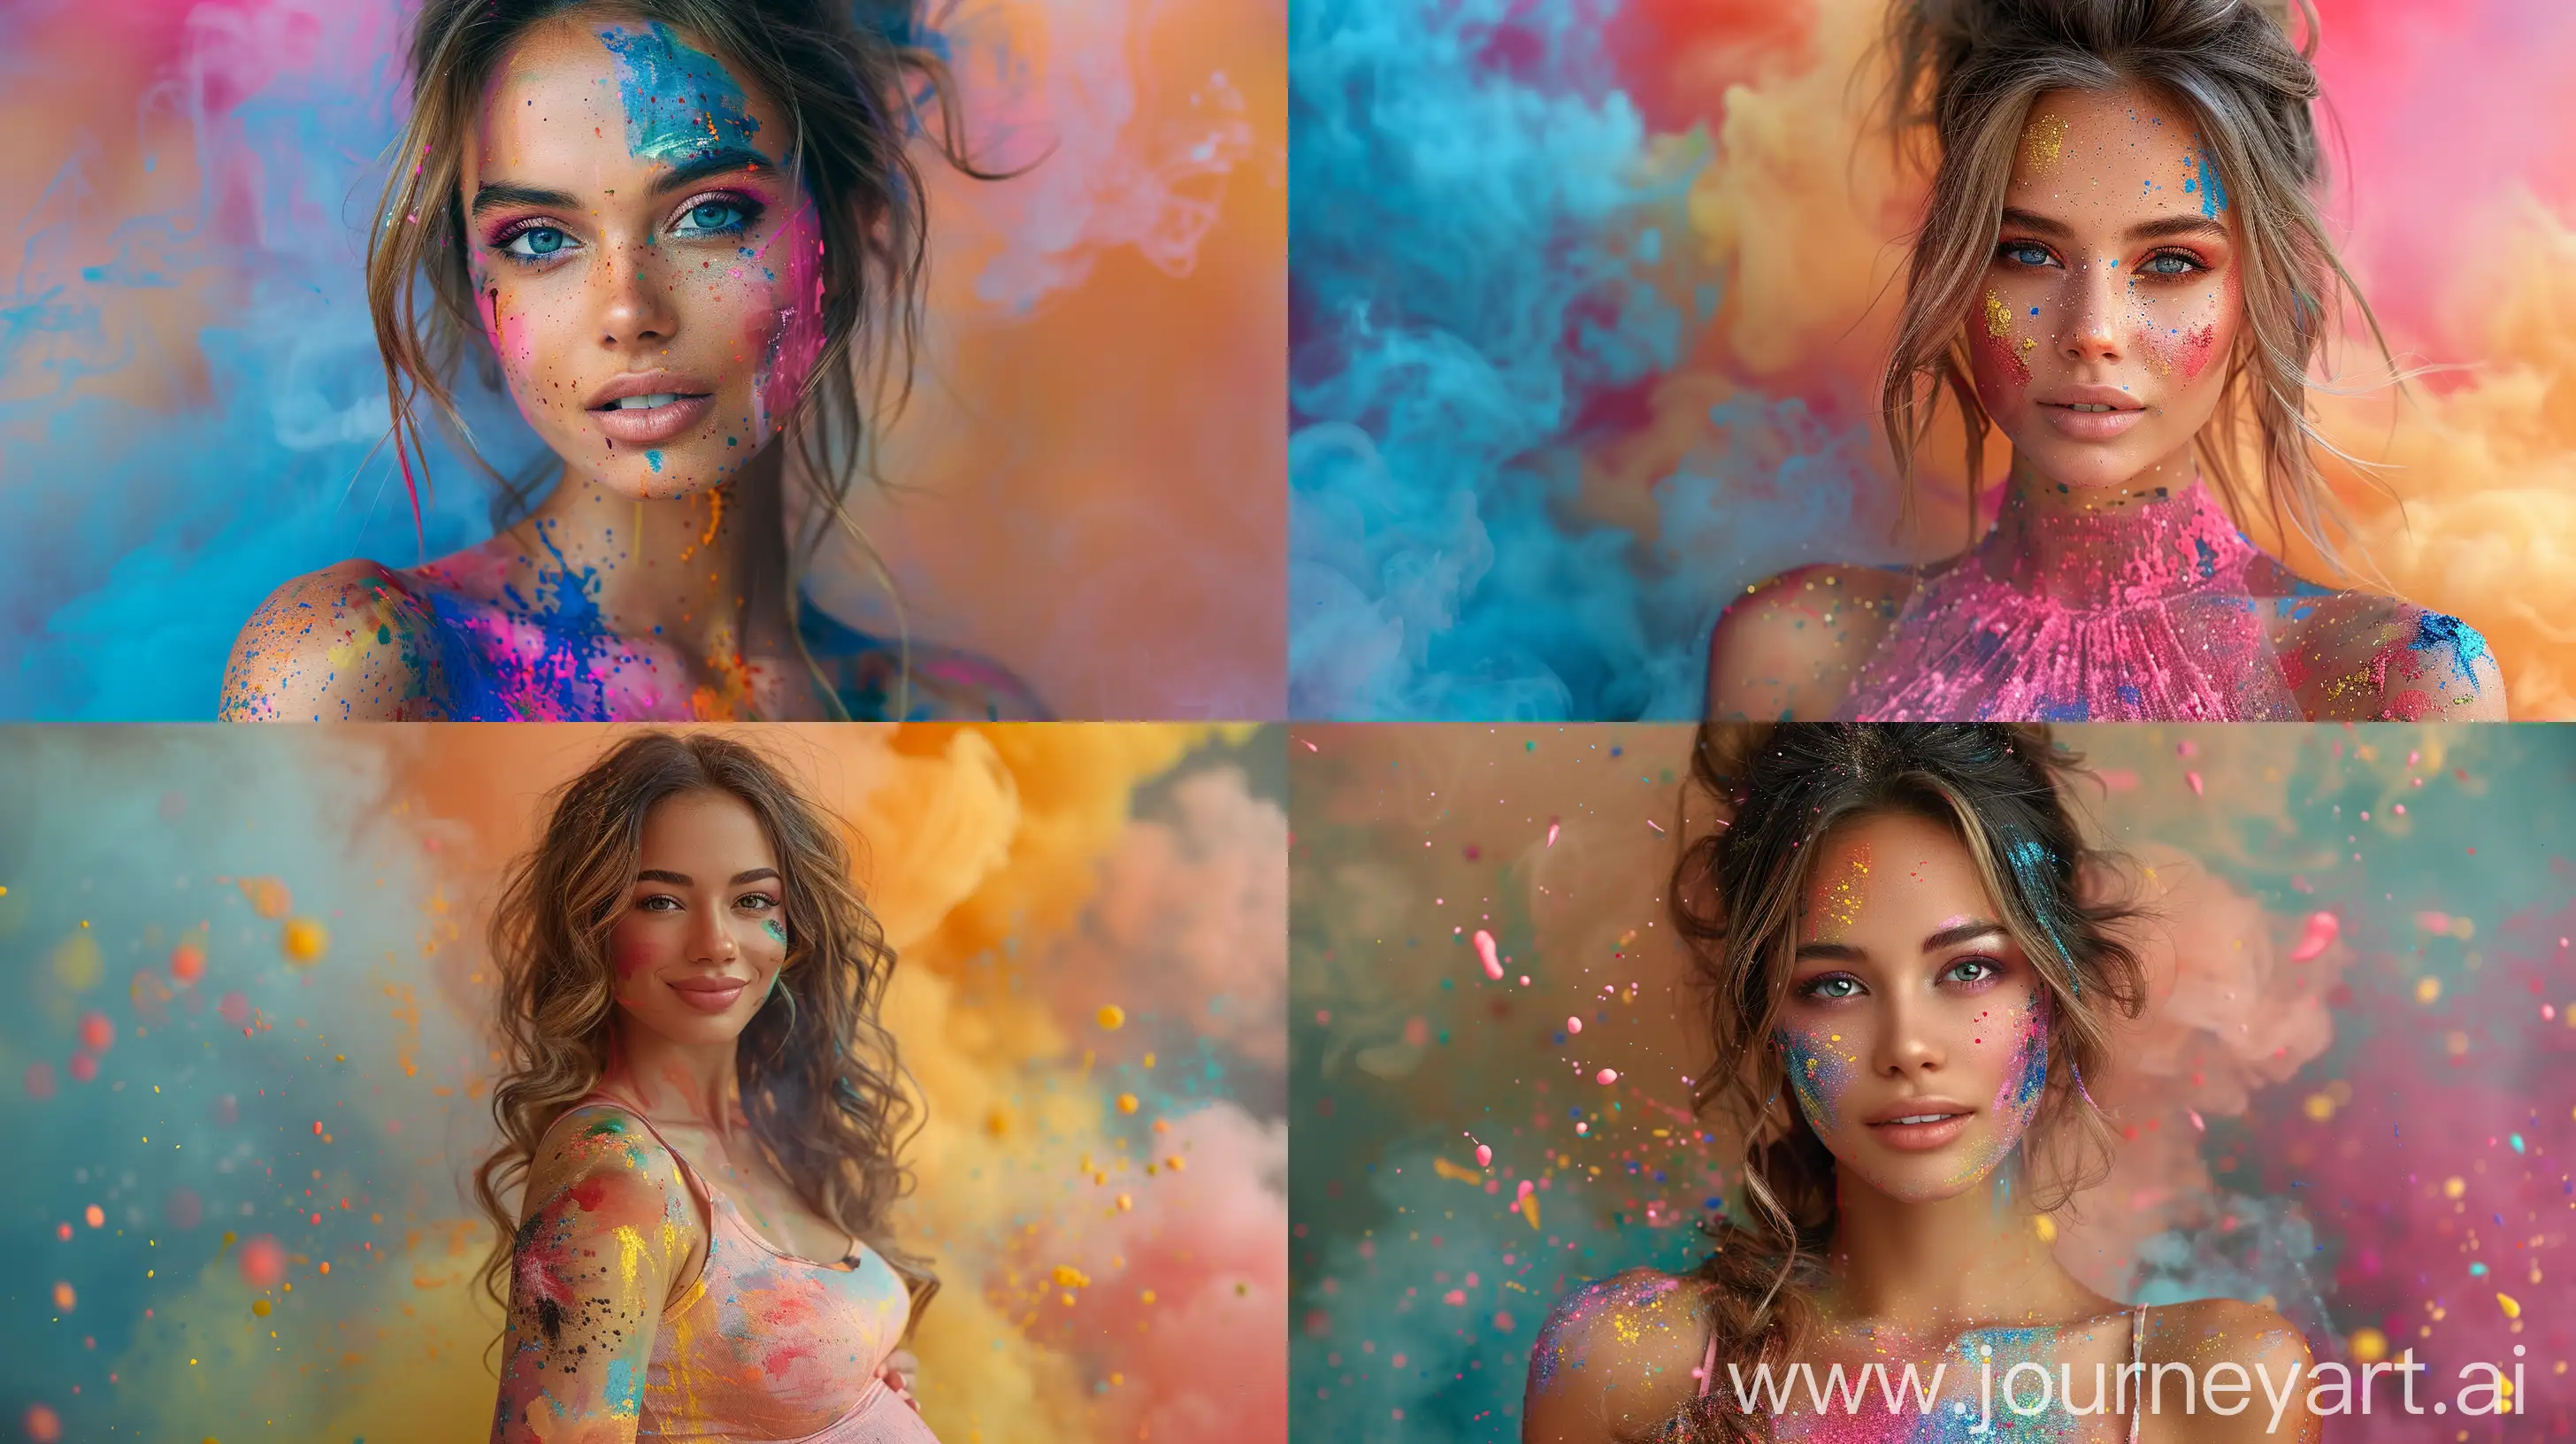 Vibrant-Young-Woman-Covered-in-Colorful-Paint-with-Splatters-Colorful-Smoke-Background